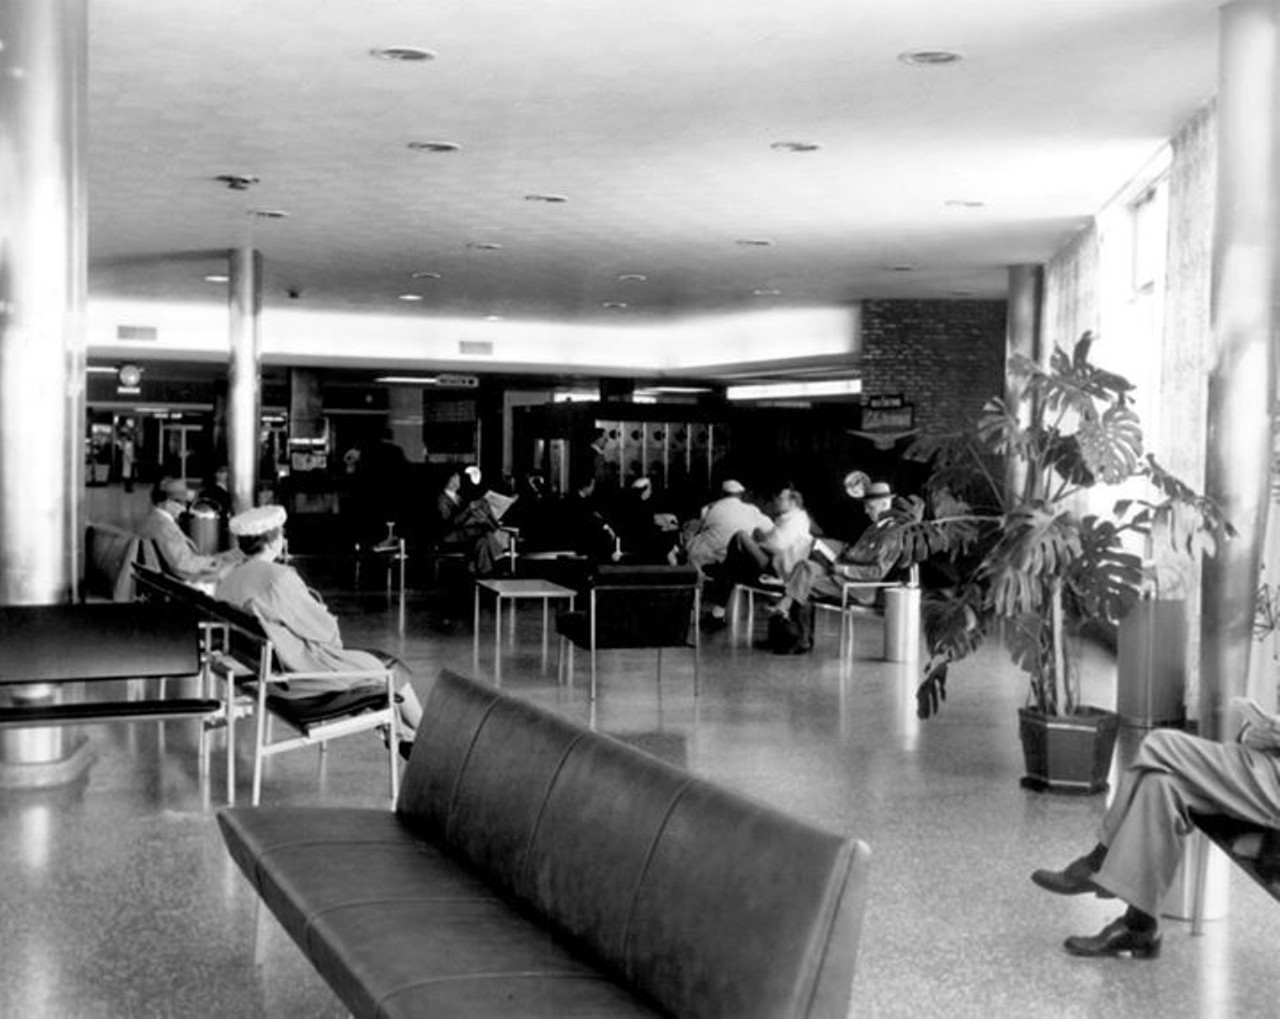 Airport waiting area, 1957.